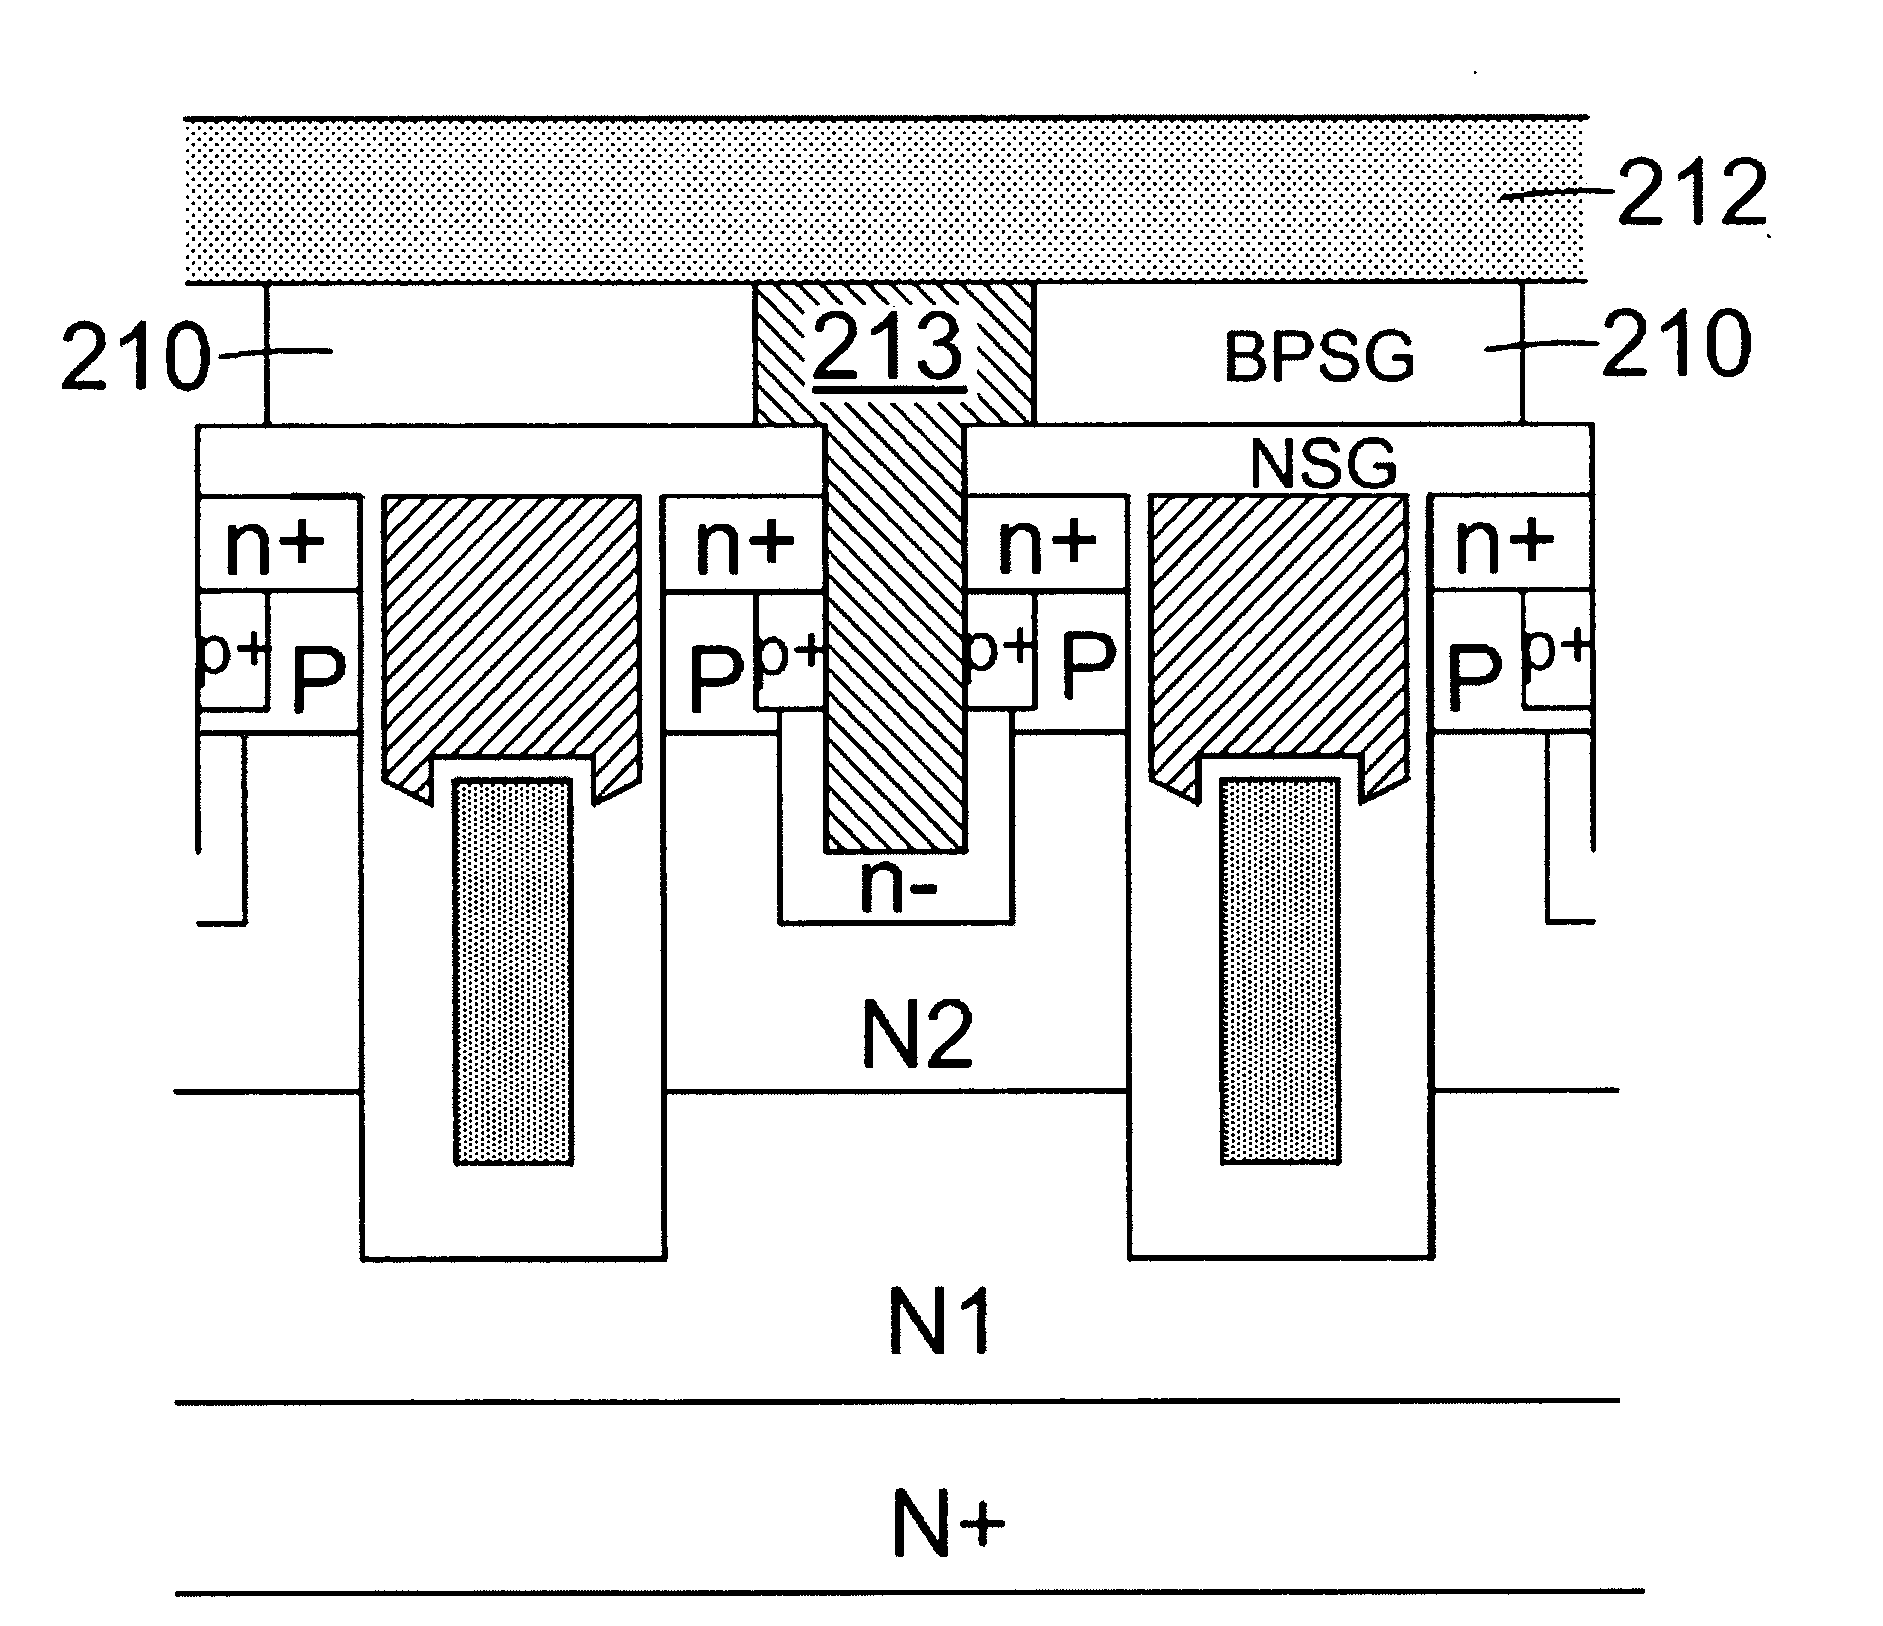 Trench mosfet with integrated schottky rectifier in same cell